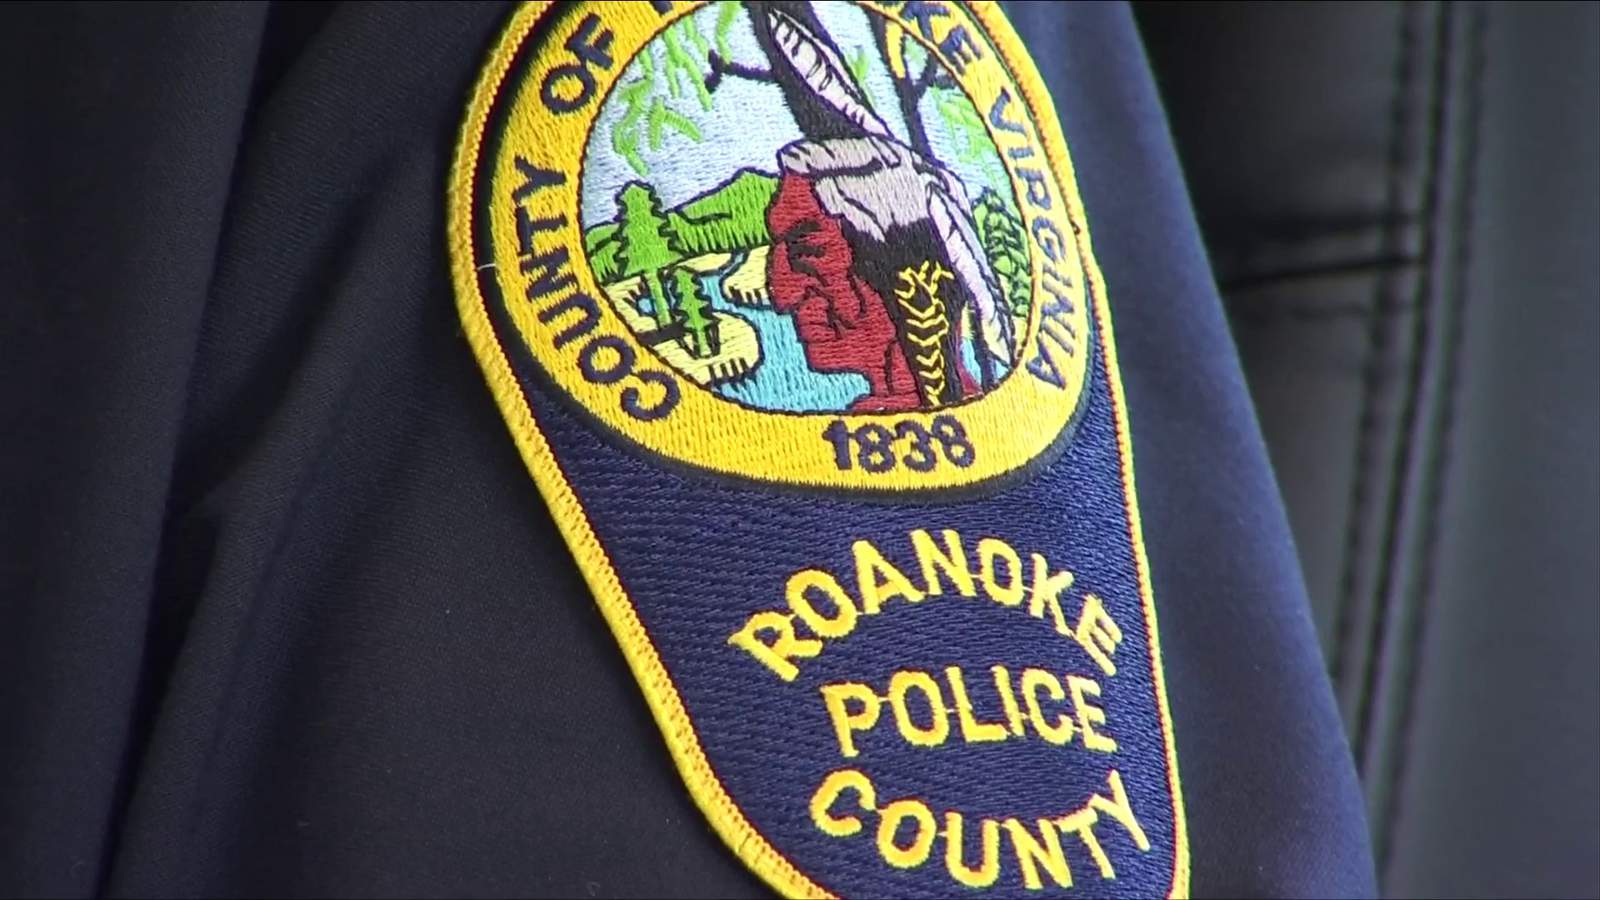 Roanoke County police officer helps de-escalate situation after boy attacks school bus monitor